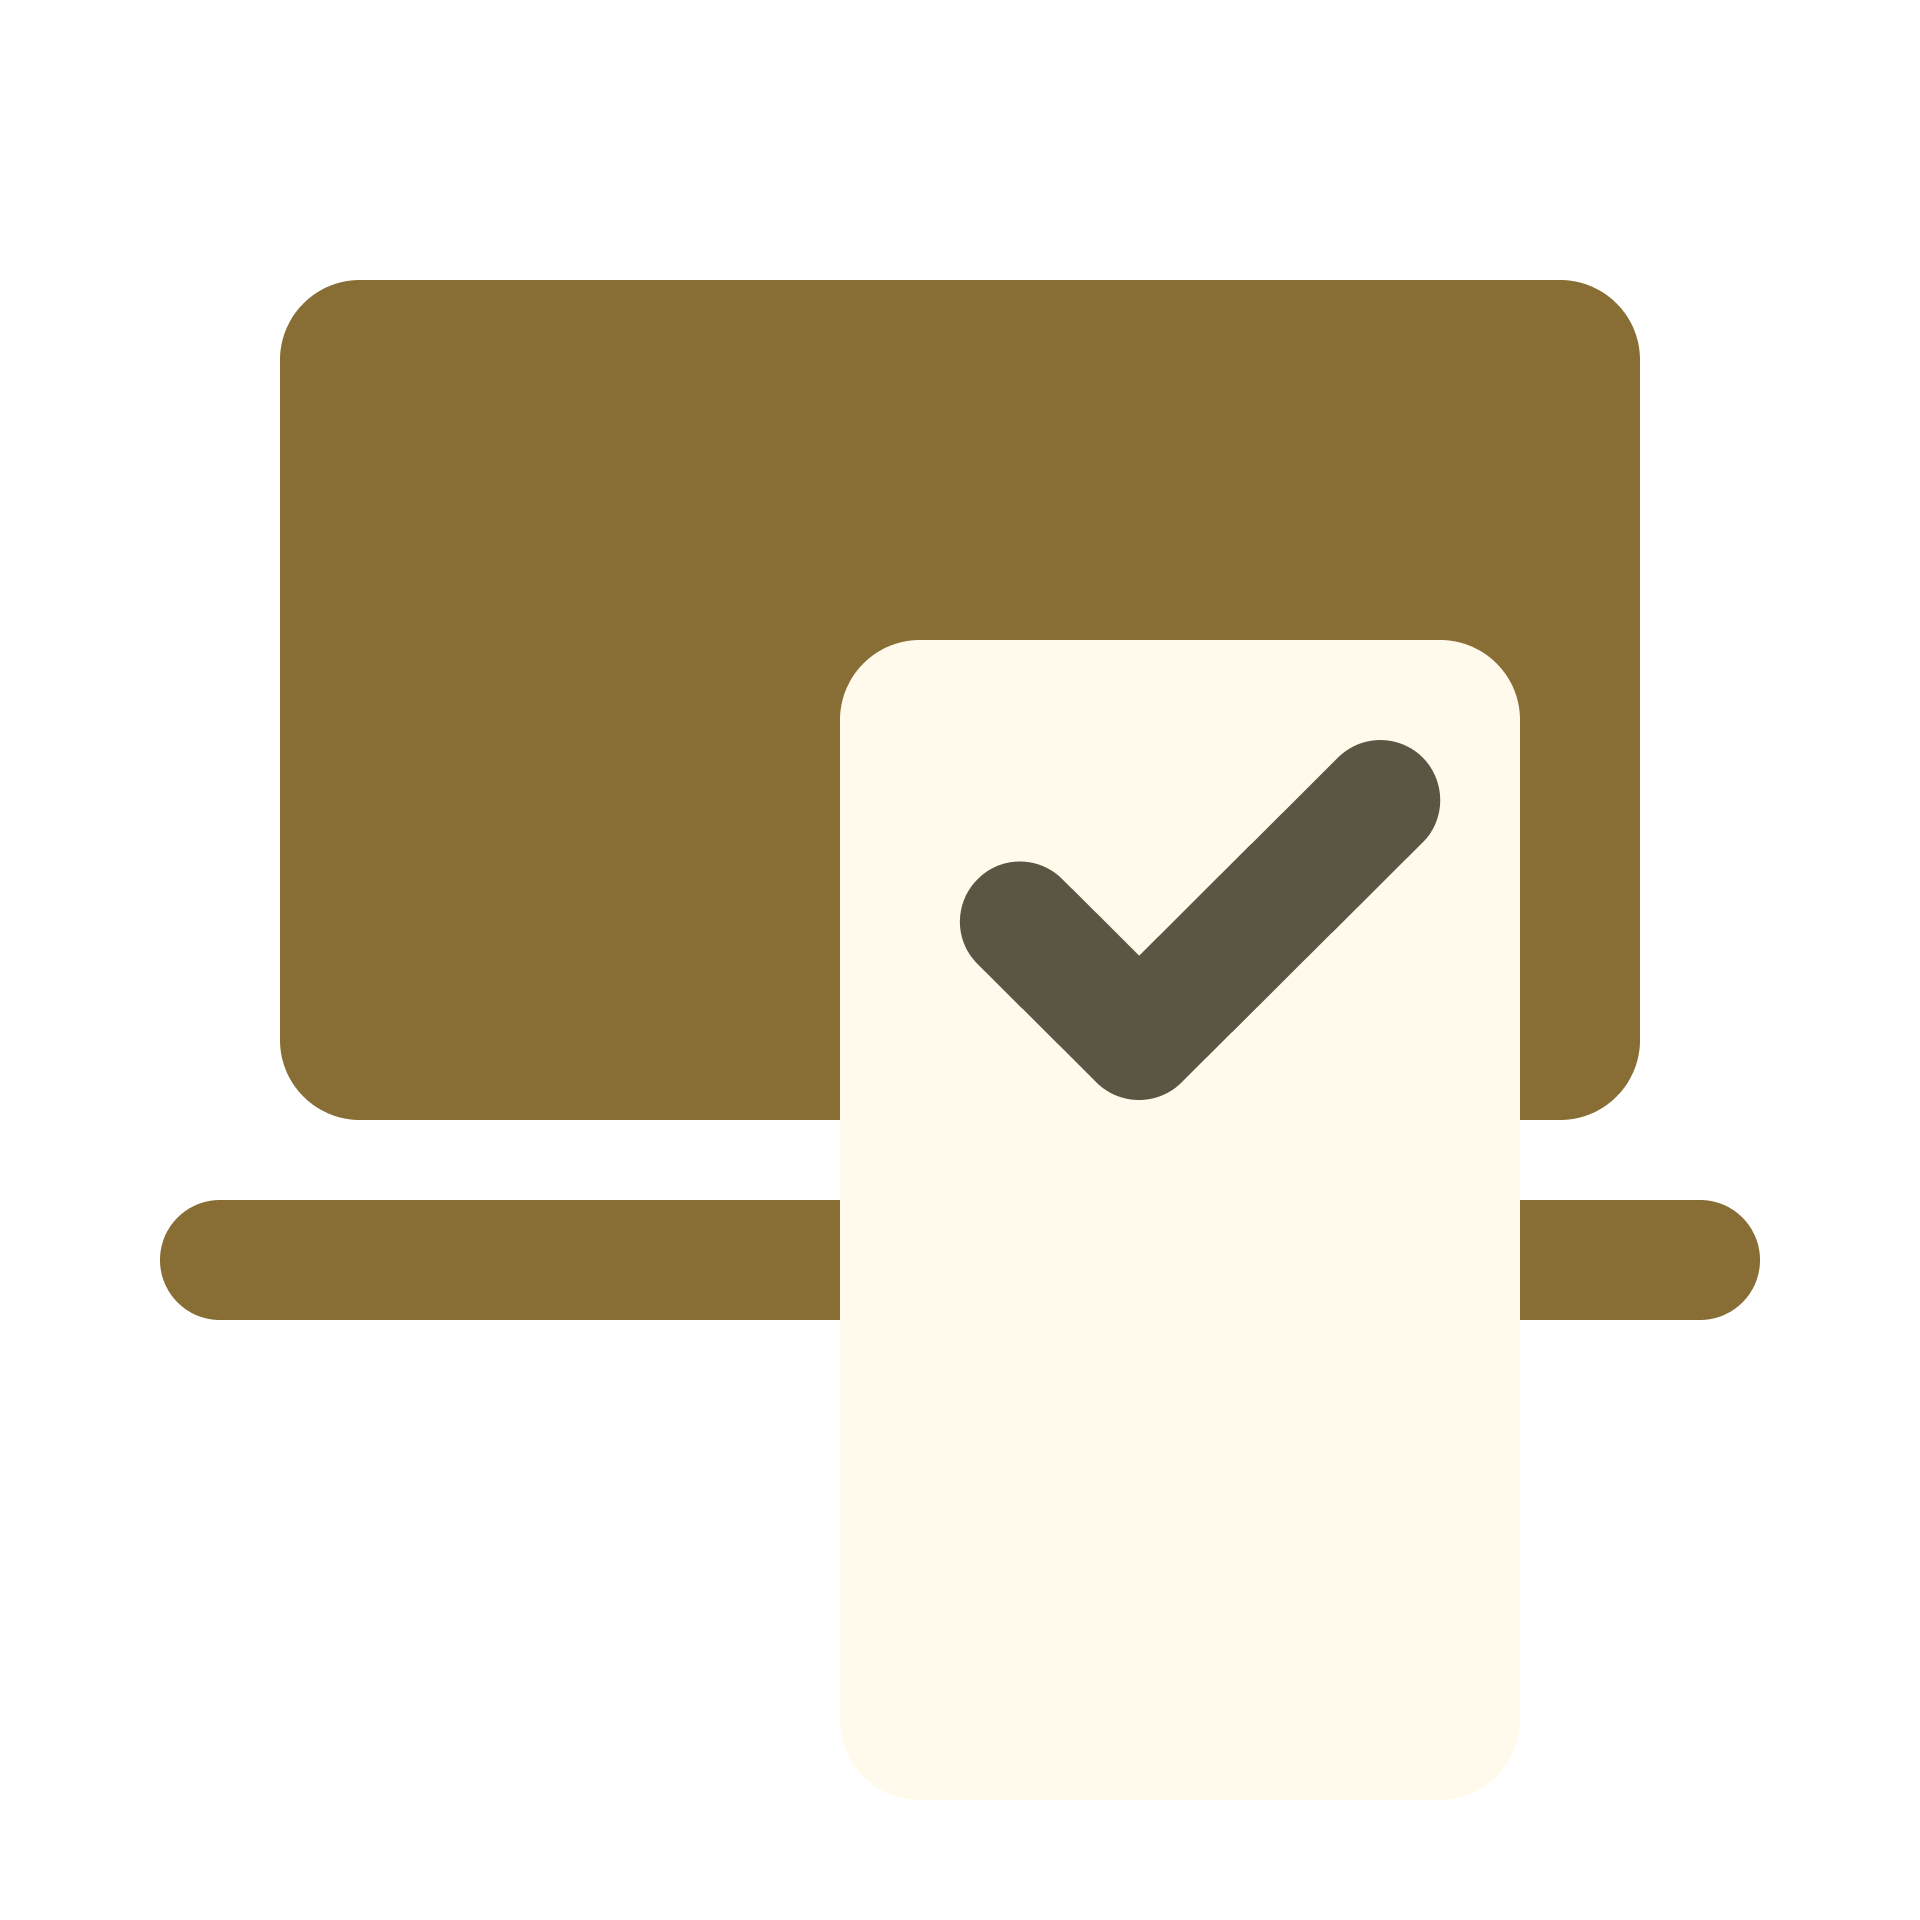 Accessible funding icon